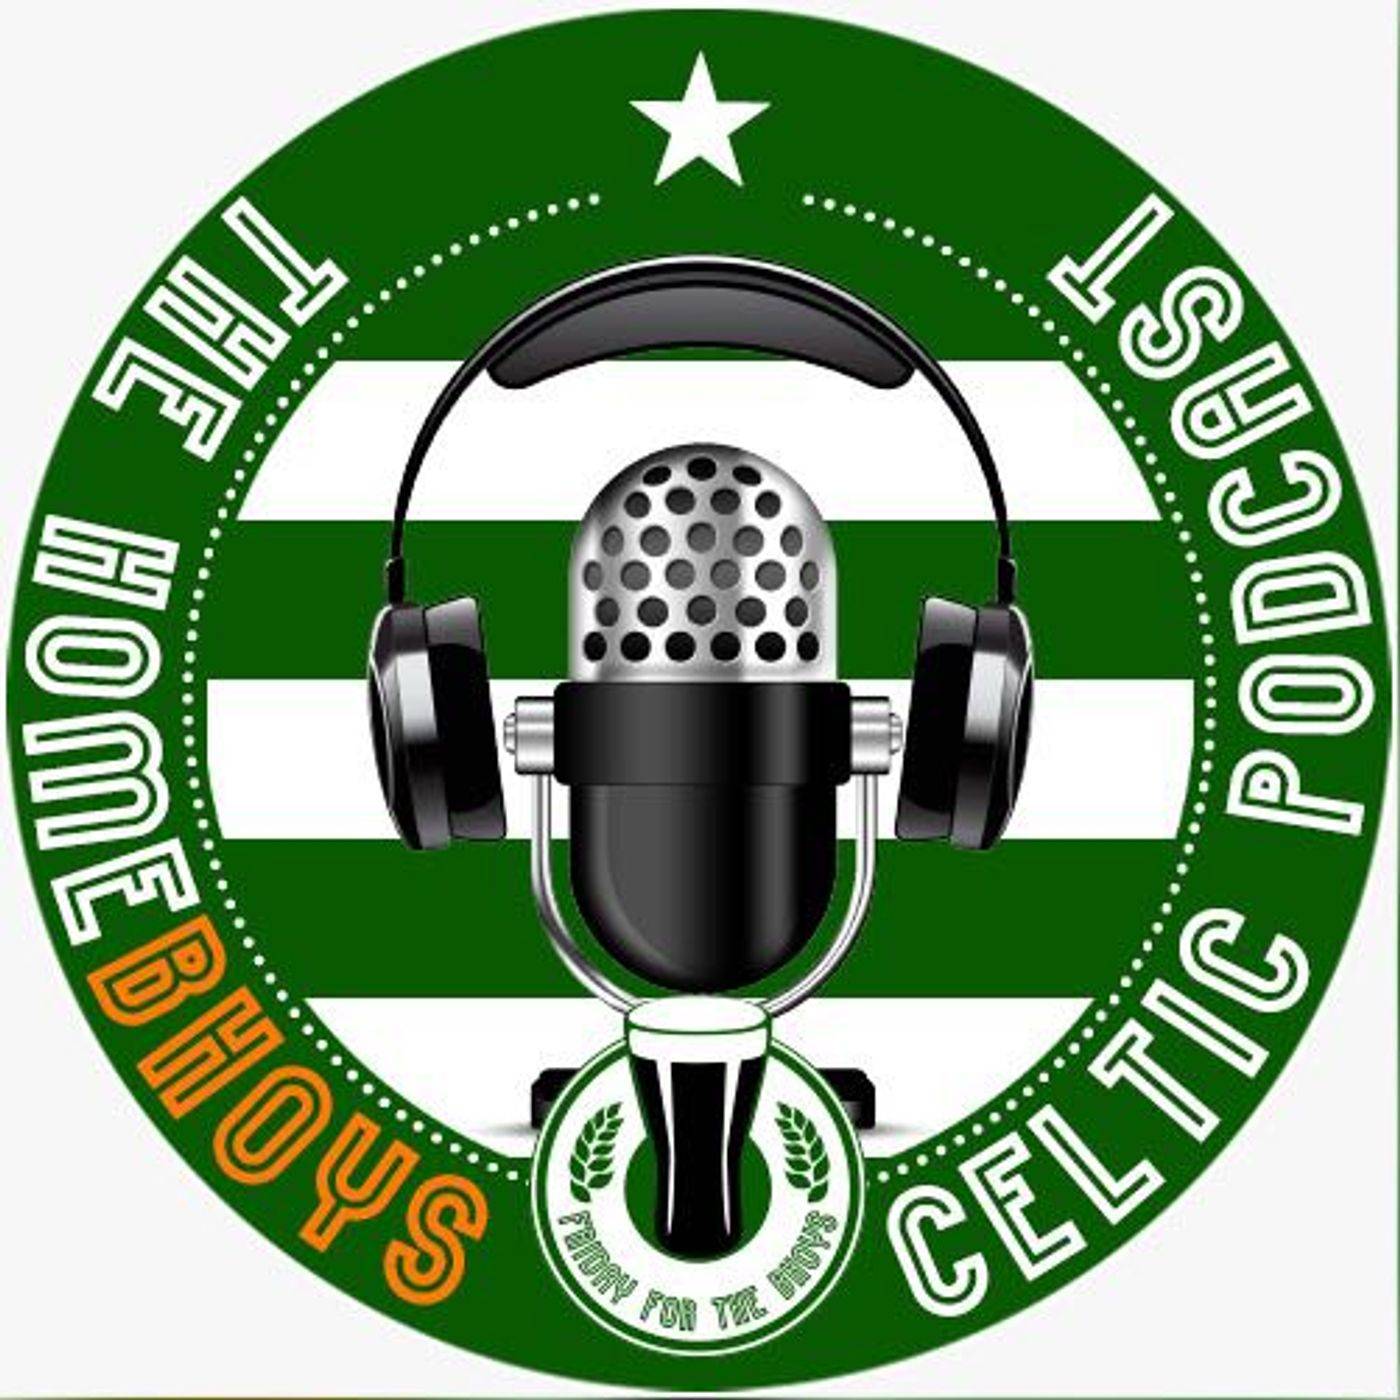 HomeBhoys #398 – Almost There!